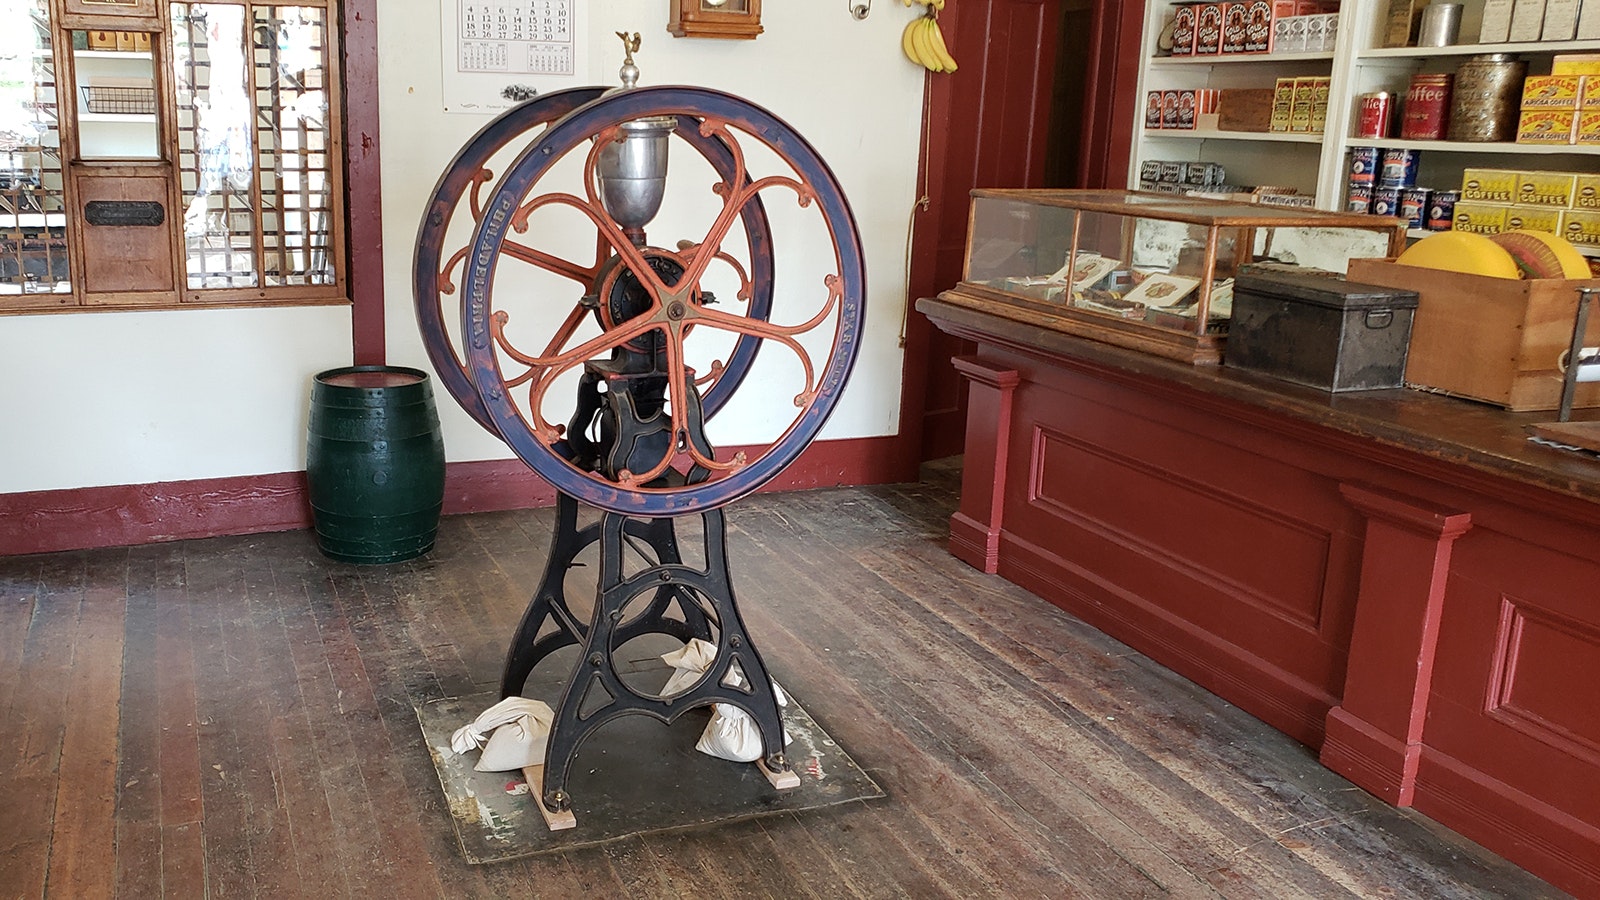 An old-fashioned coffee mill stands in the mercantile. Beans were put into the silver canister at the top and the wheel turned. Ground beans would drain out the bottom into a small box.